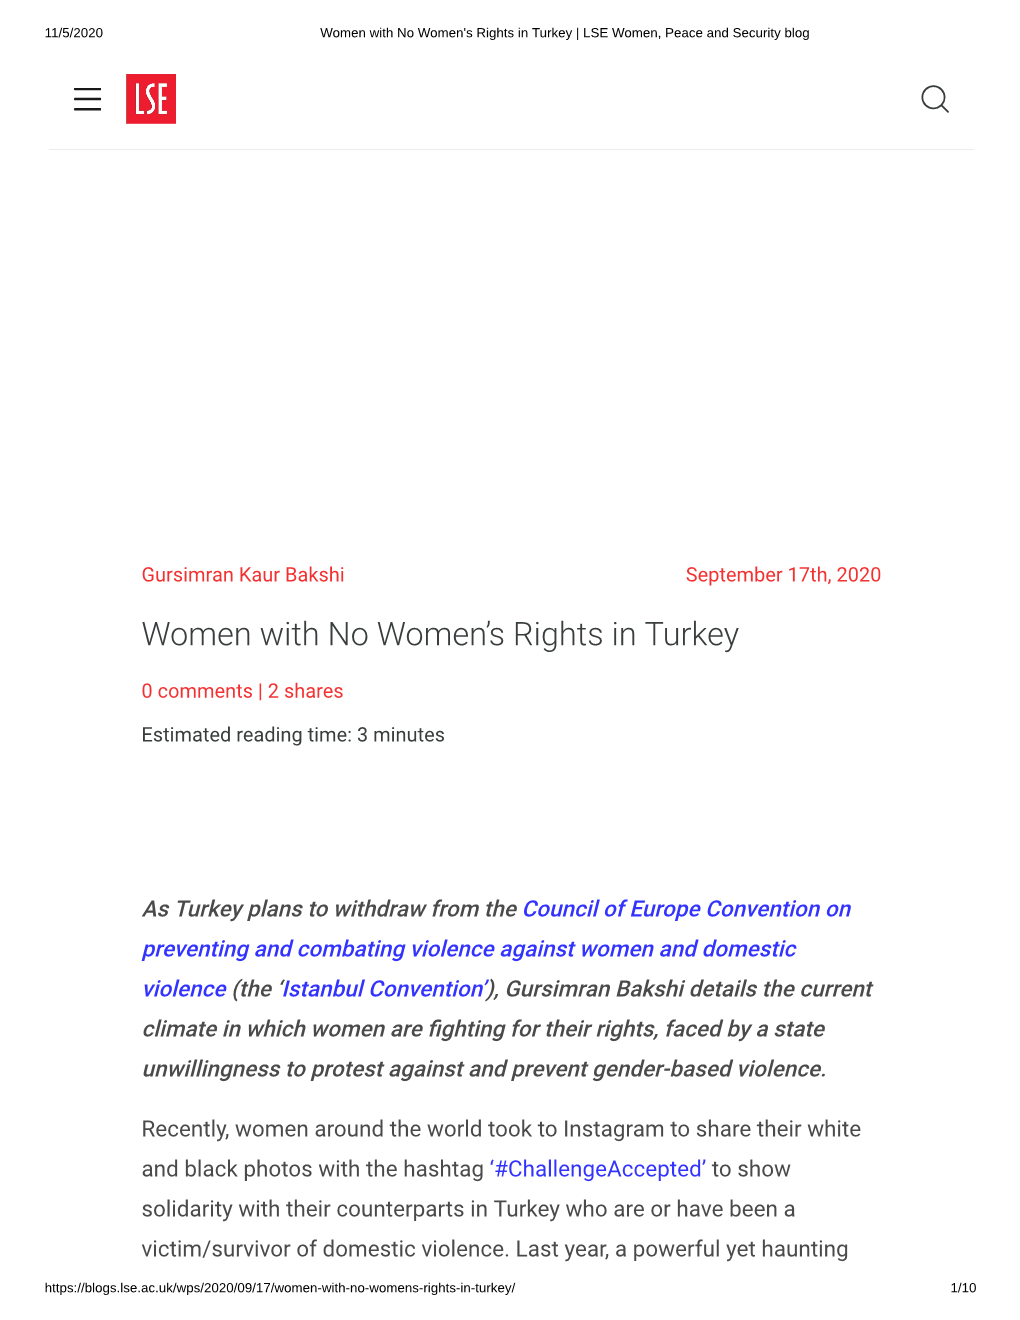 Women with No Women's Rights in Turkey | LSE Women, Peace and Security Blog